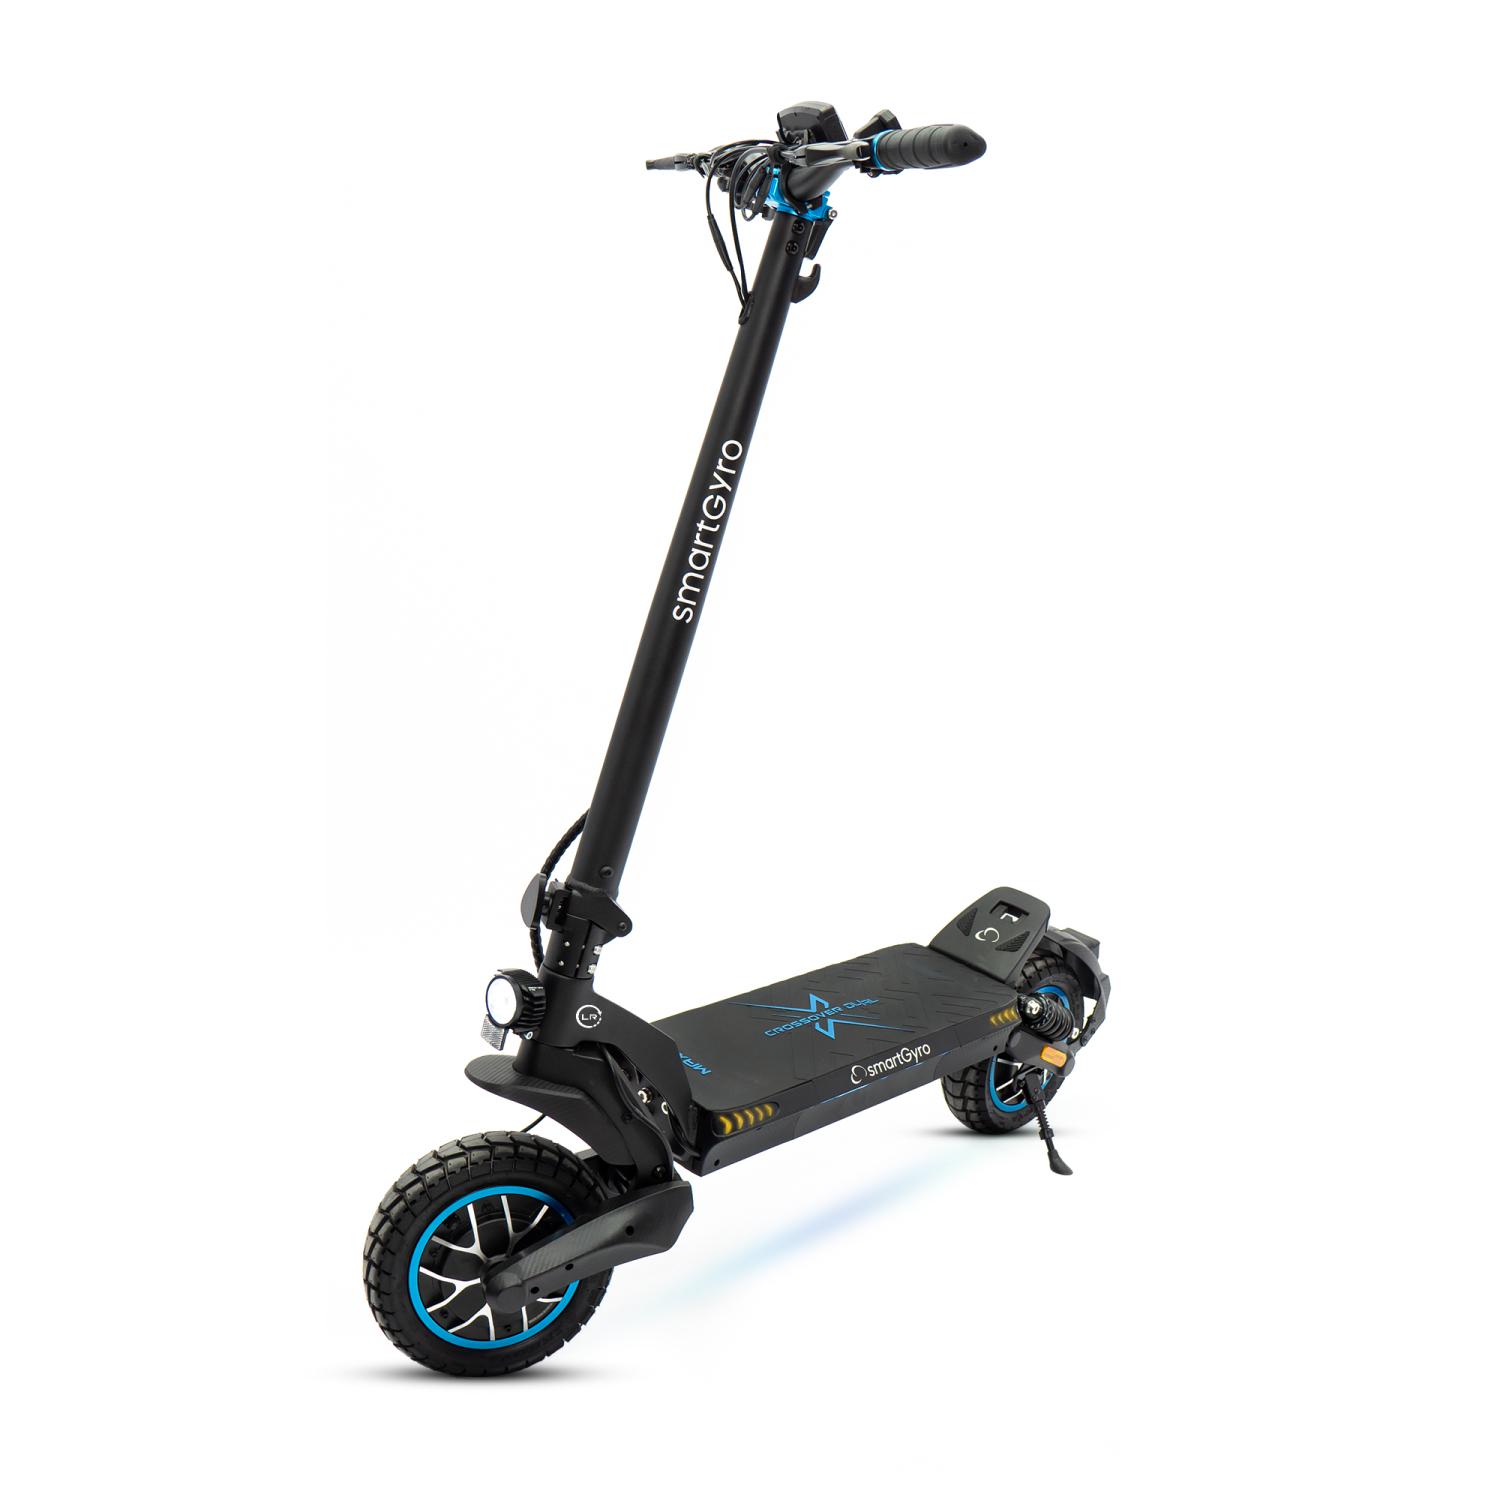 https://tallerdelpatinete.es/wp-content/uploads/2023/11/patinete-electrico-smartgyro-crossover-dual-max-lr-certificado-1.jpg